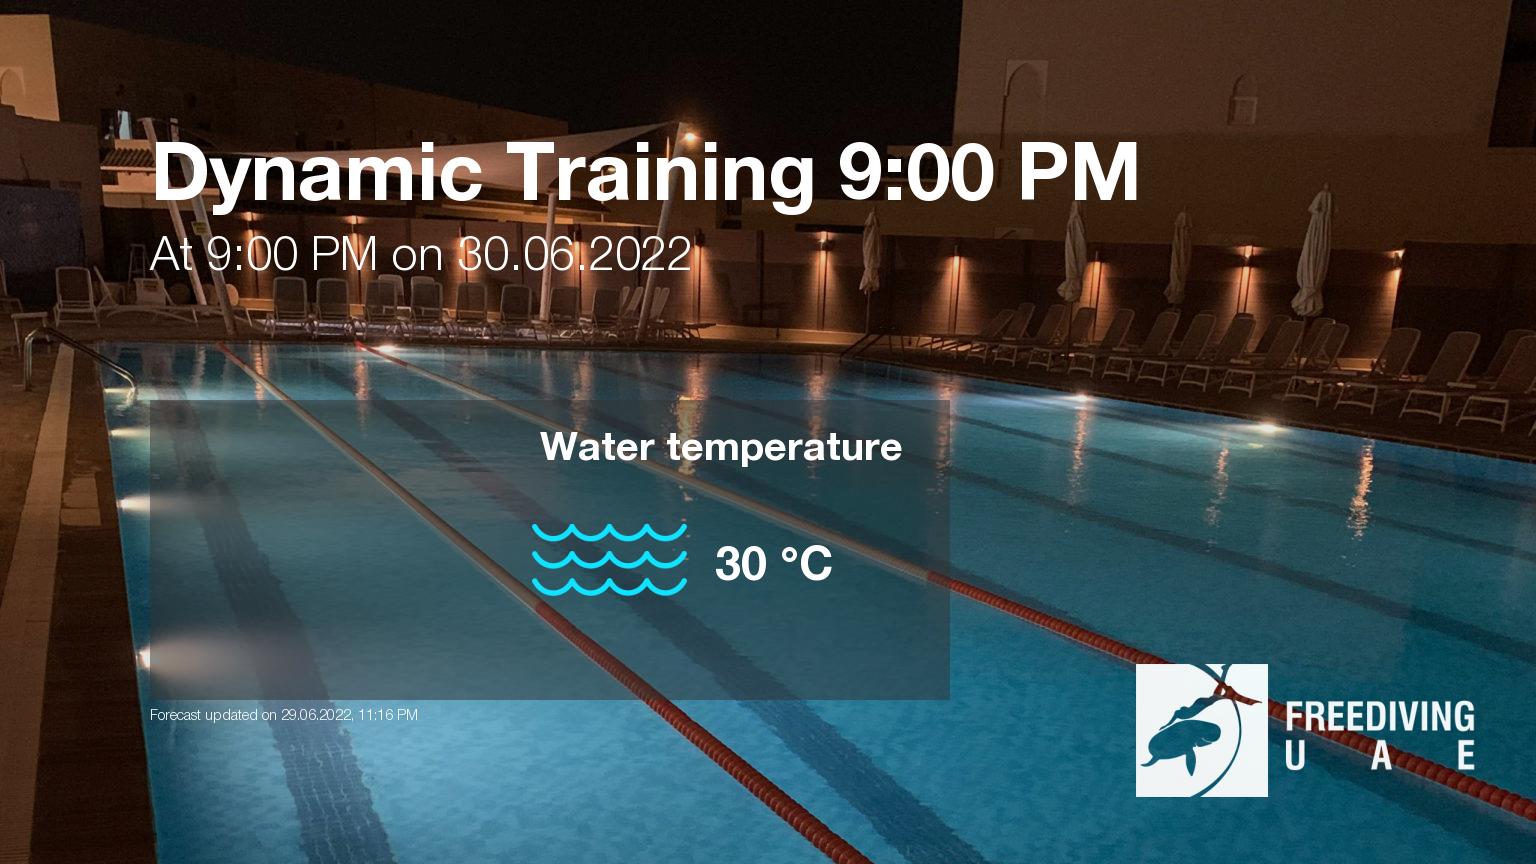 Expected weather during Dynamic Training 9:00 PM on Thu, Jun 30, at 9:00 PM